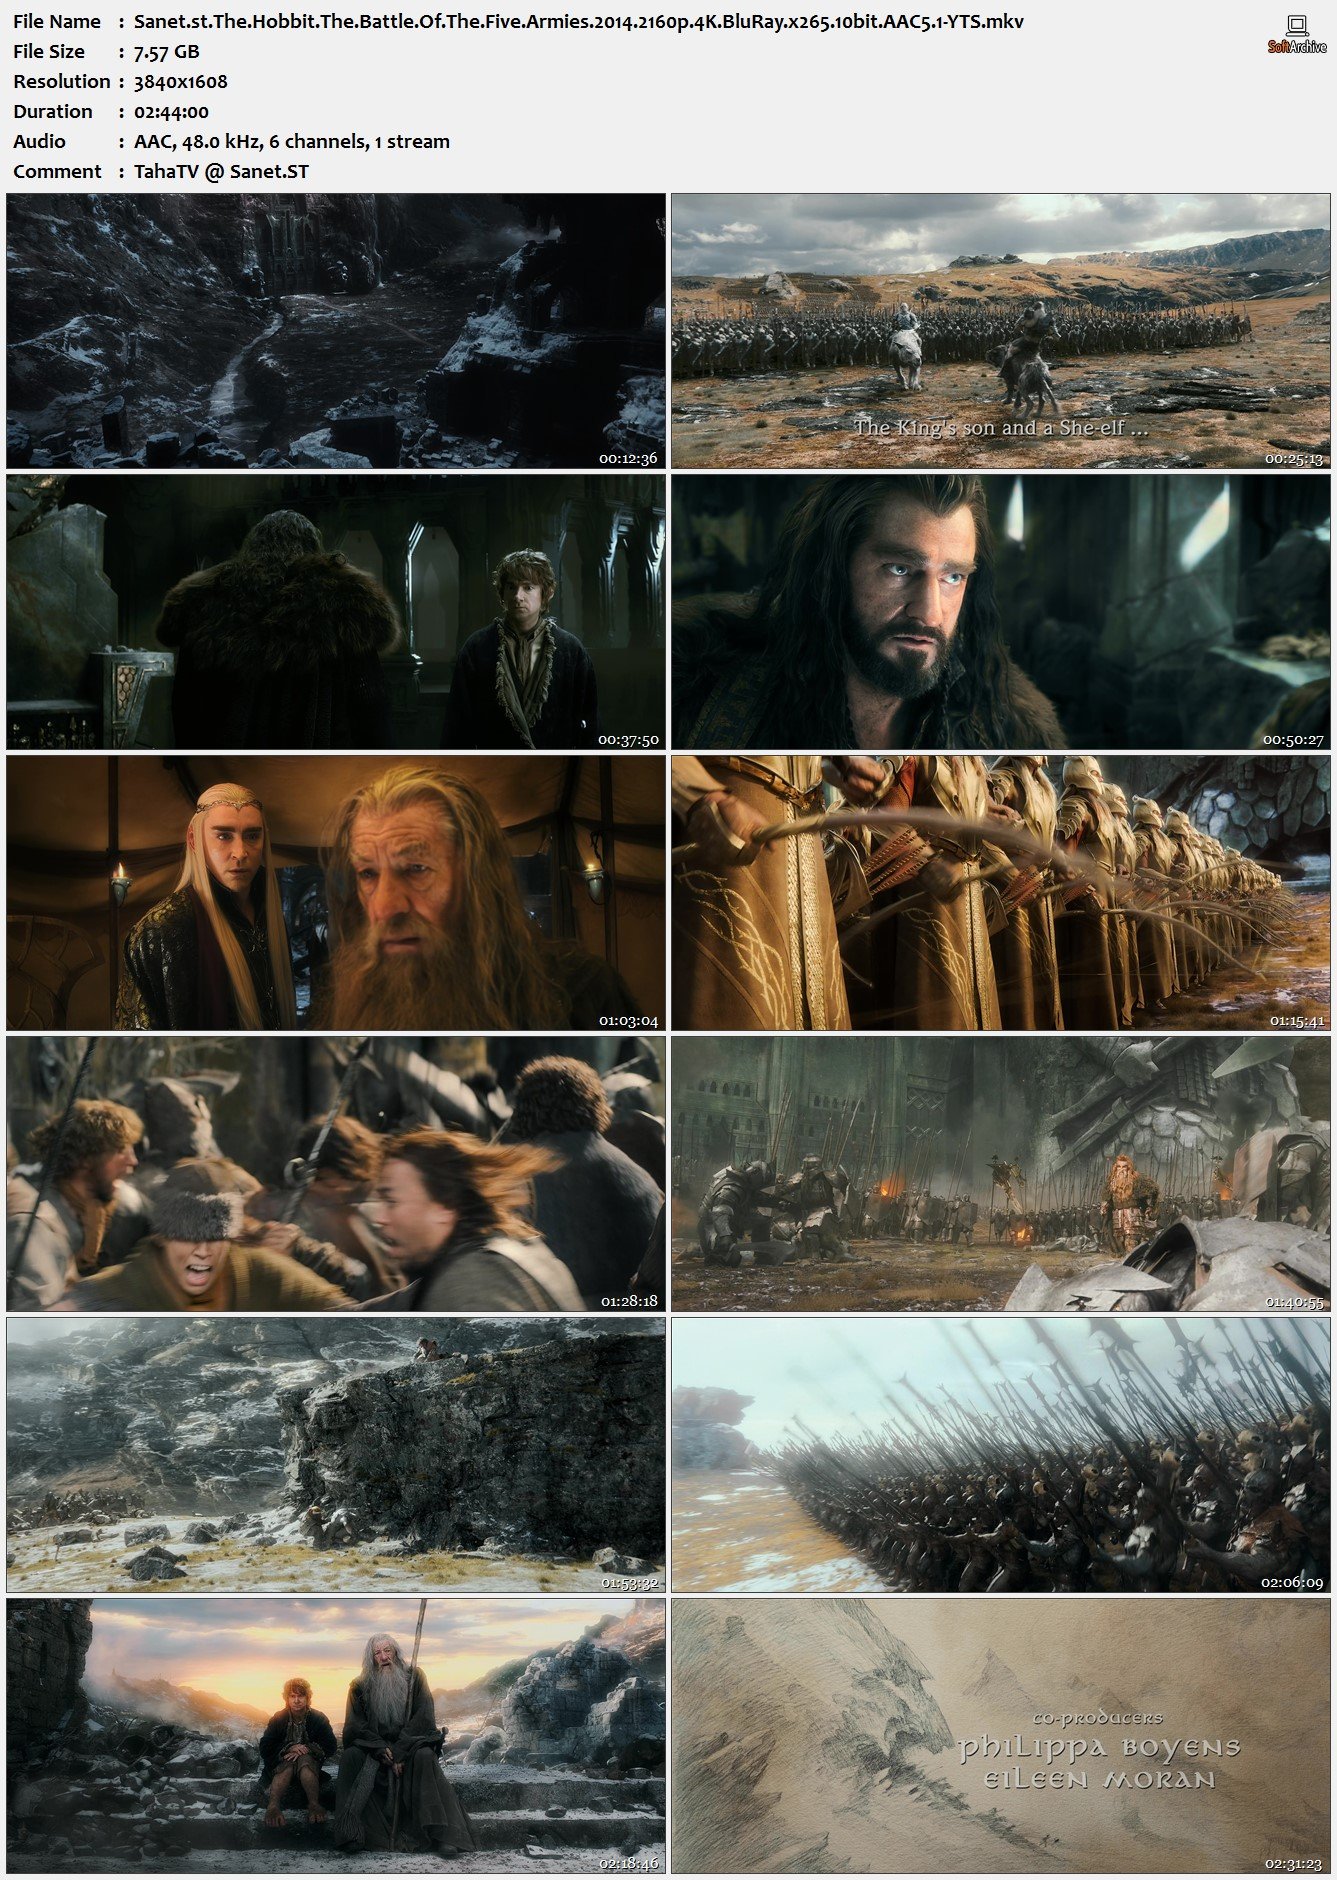 The Hobbit: The Battle of the Five Ar for apple download